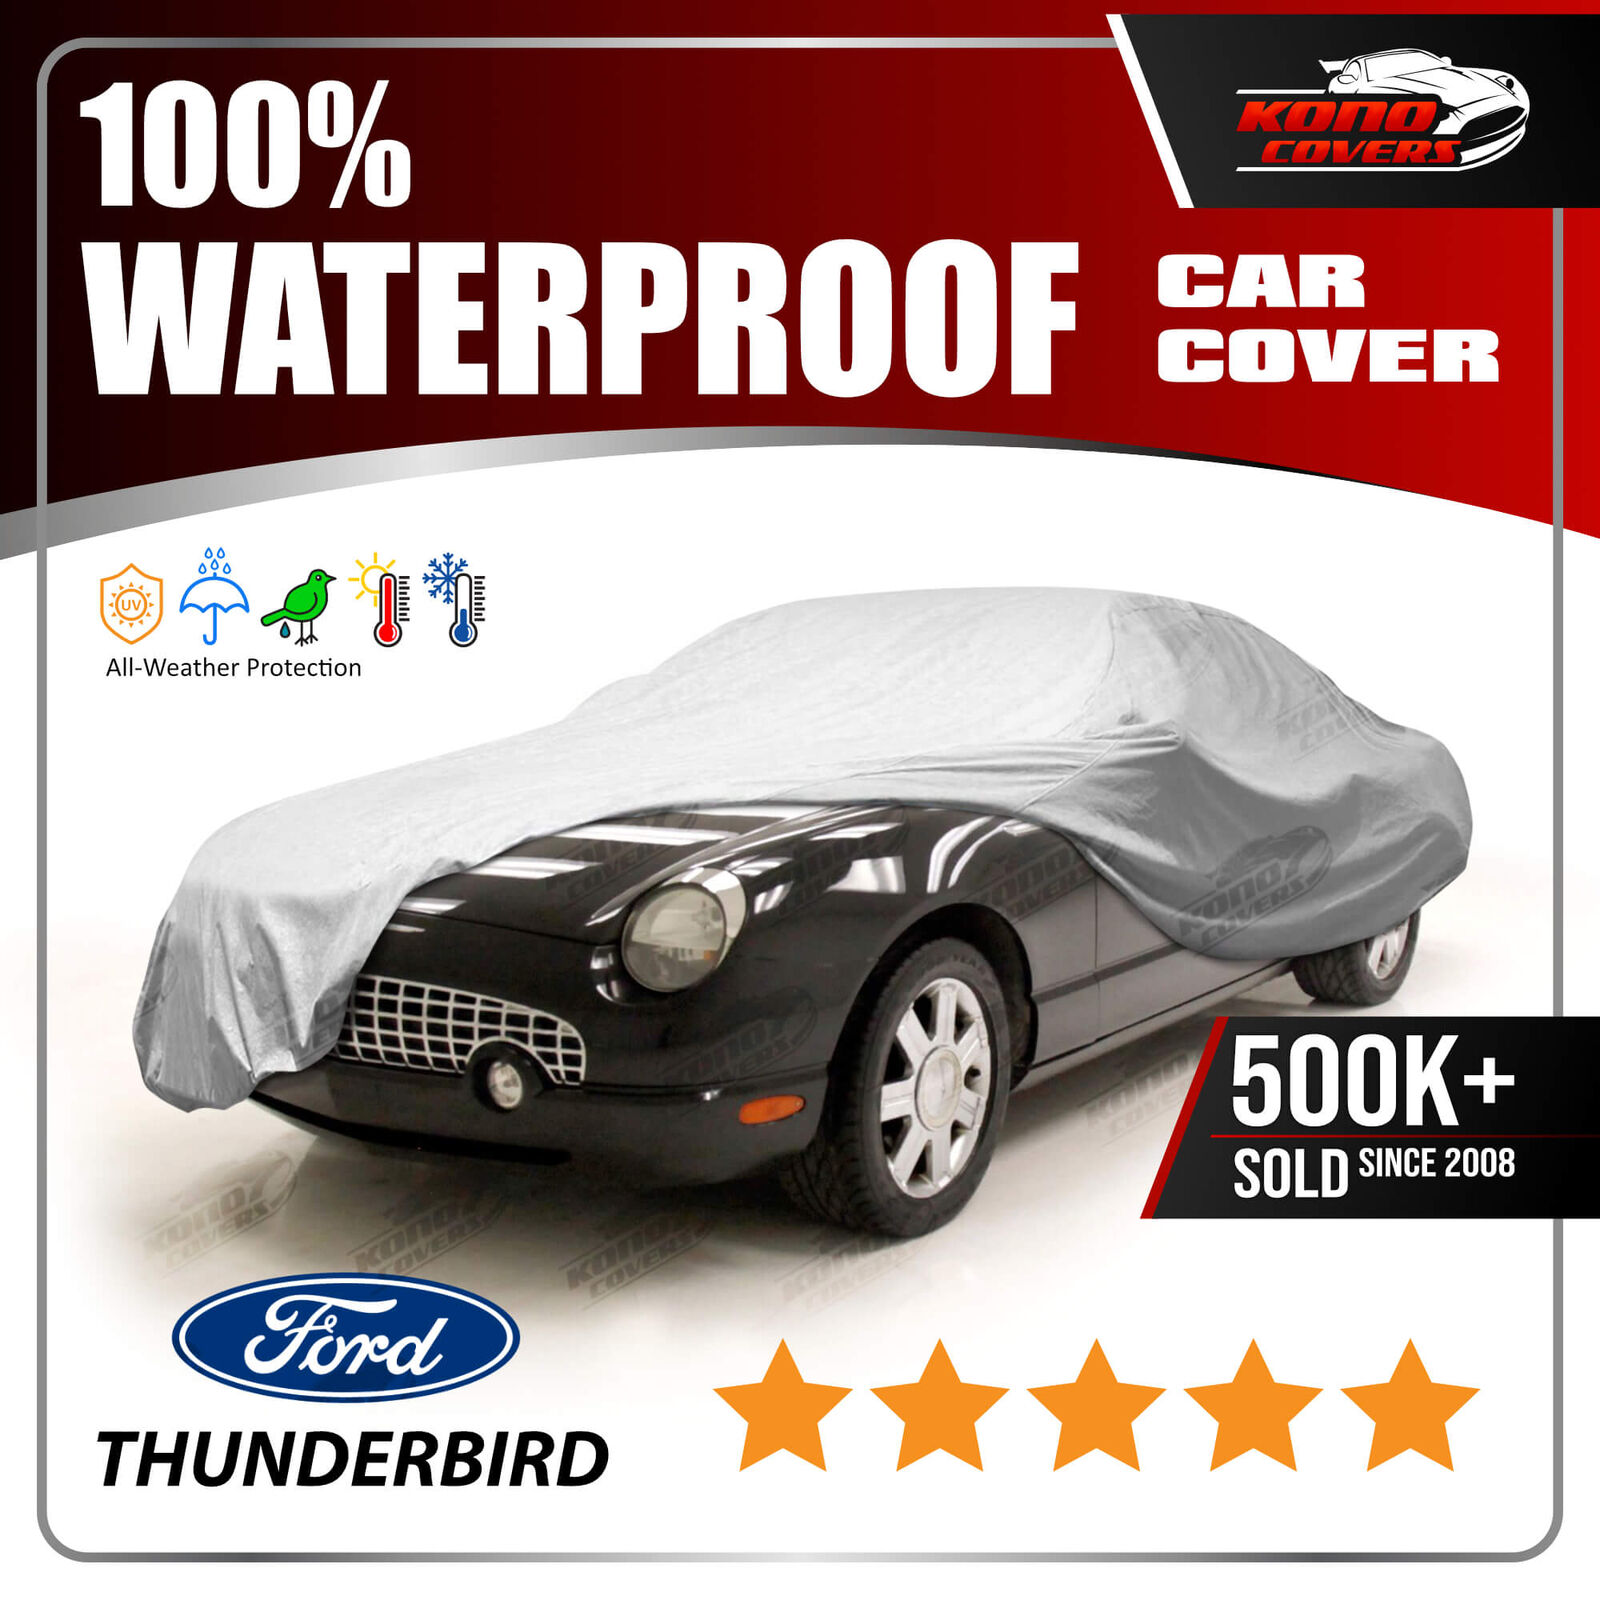 Ford Thunderbird 2002-2005 CAR COVER - 100% Waterproof 100% Breathable